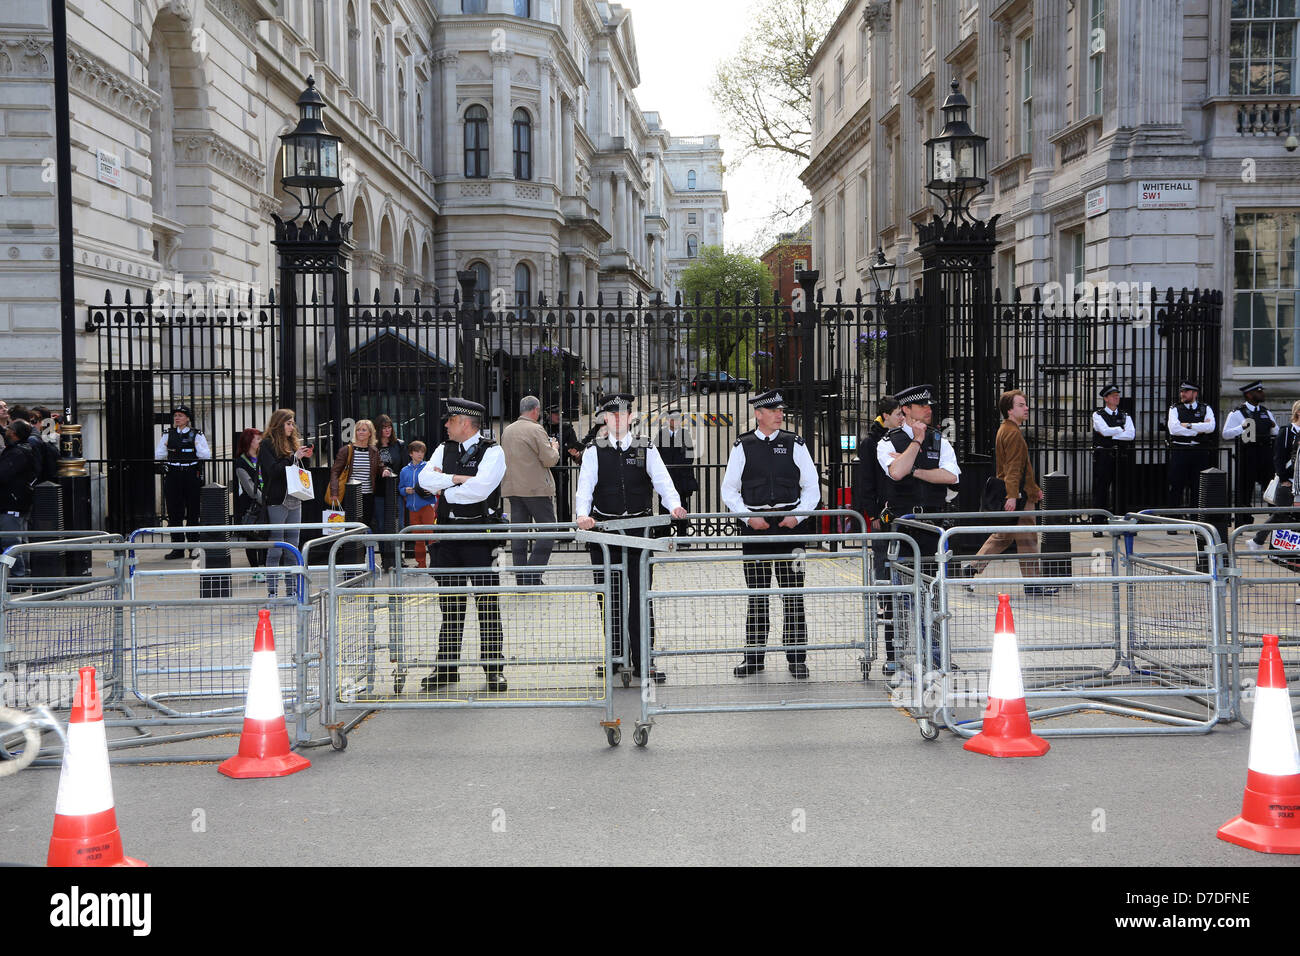 London, UK. 4th May 2013. Protestors blocked by Police at the Anonymous UK anti-austerity demonstration protecting Downing Streetl, London, England. Credit:  Paul Brown / Alamy Live News Stock Photo